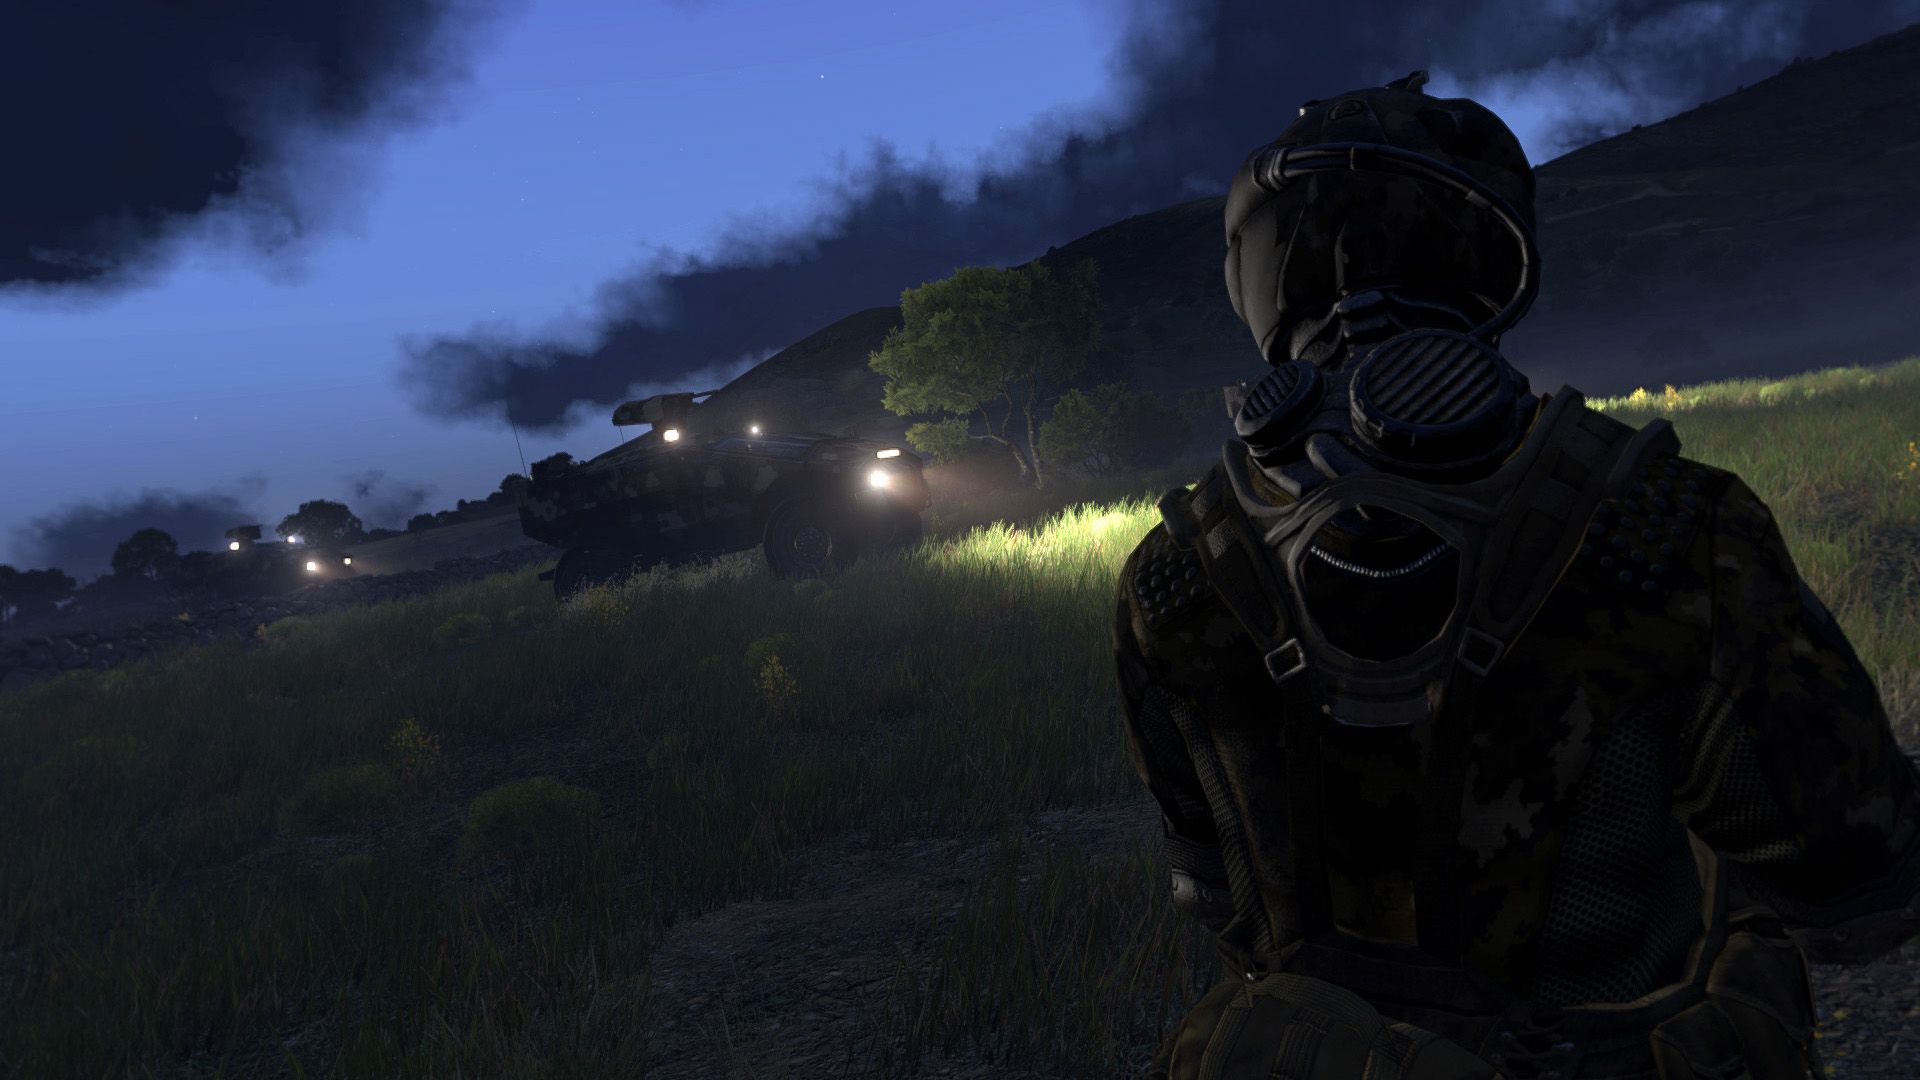 Best Arma 3 Mods brought to you by Shockbyte!